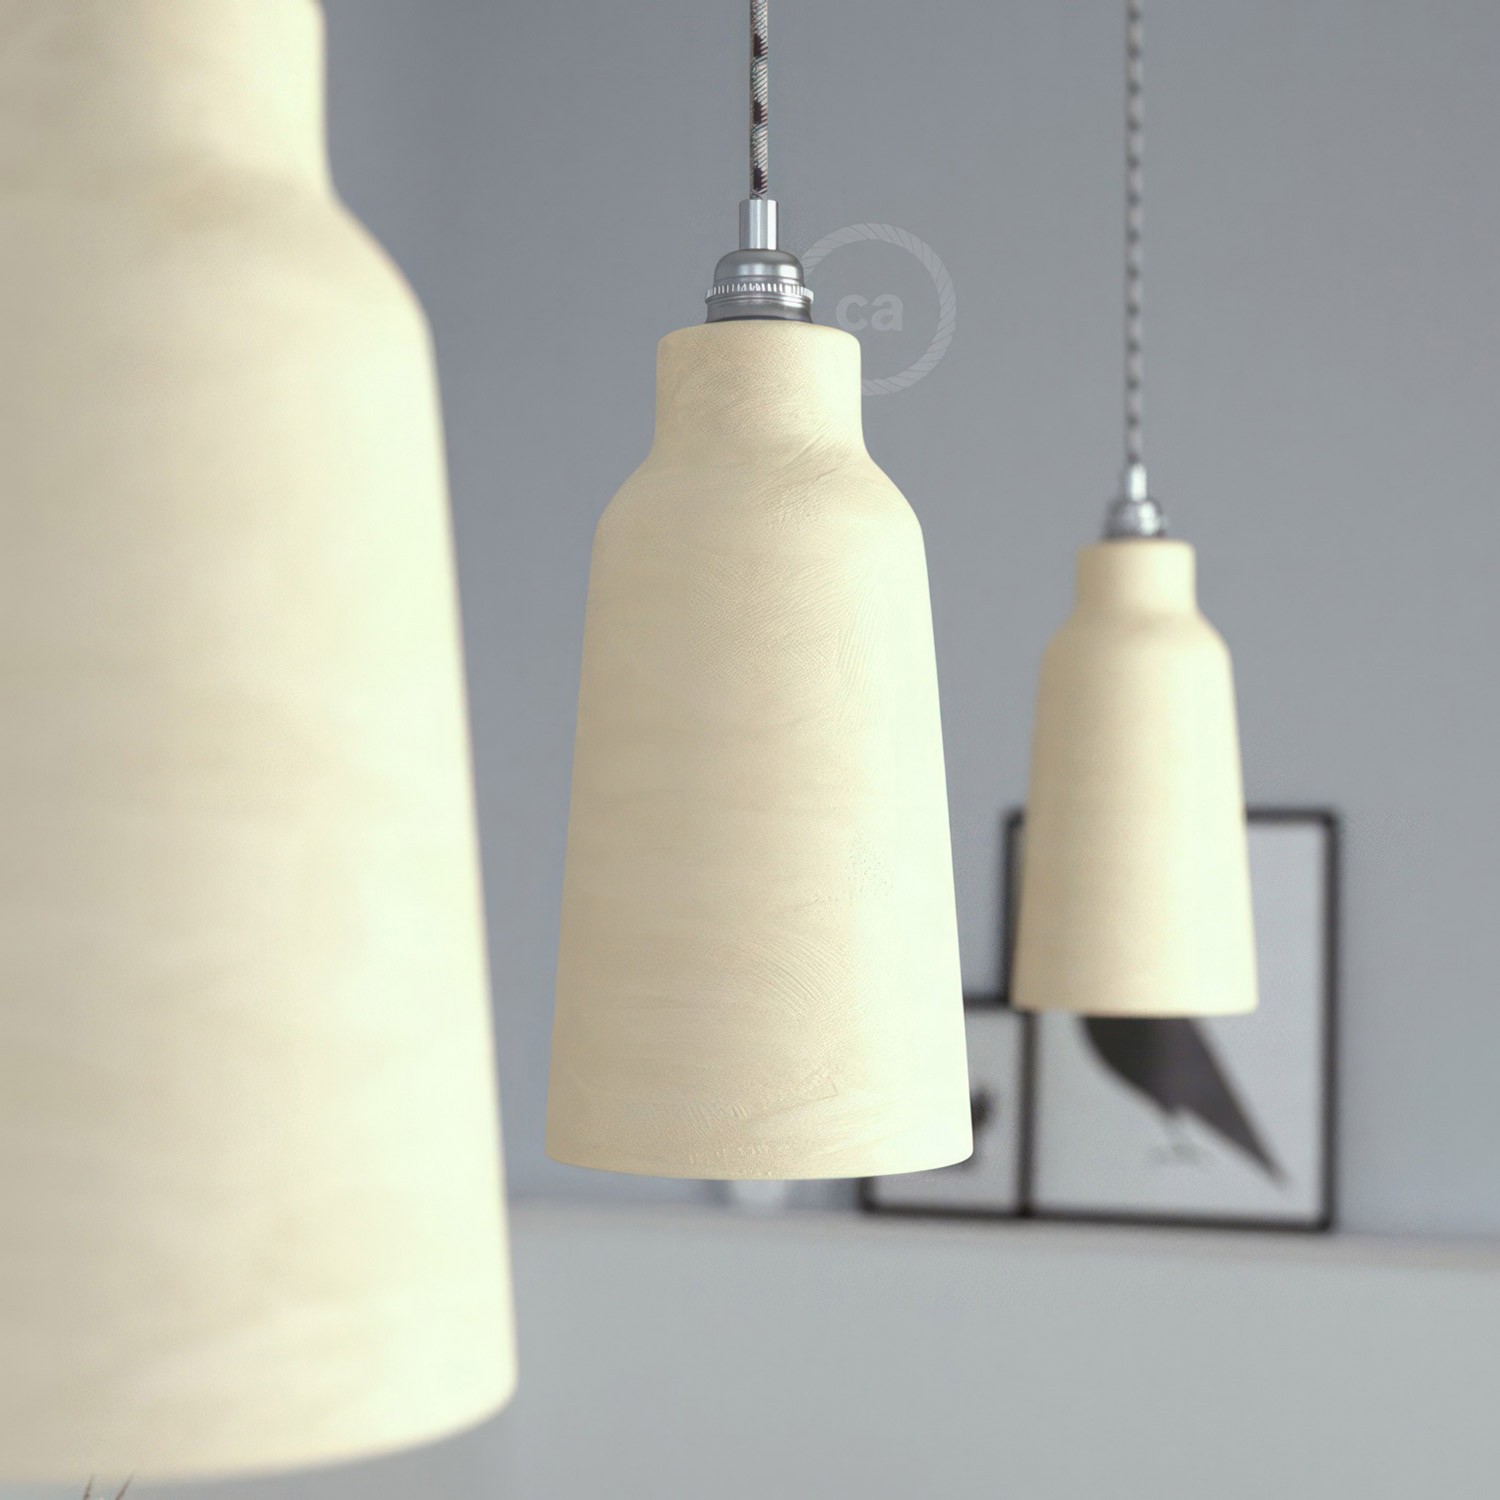 Pendant lamp with textile cable, Bottle ceramic lampshade and metal details - Made in Italy - Bulb included